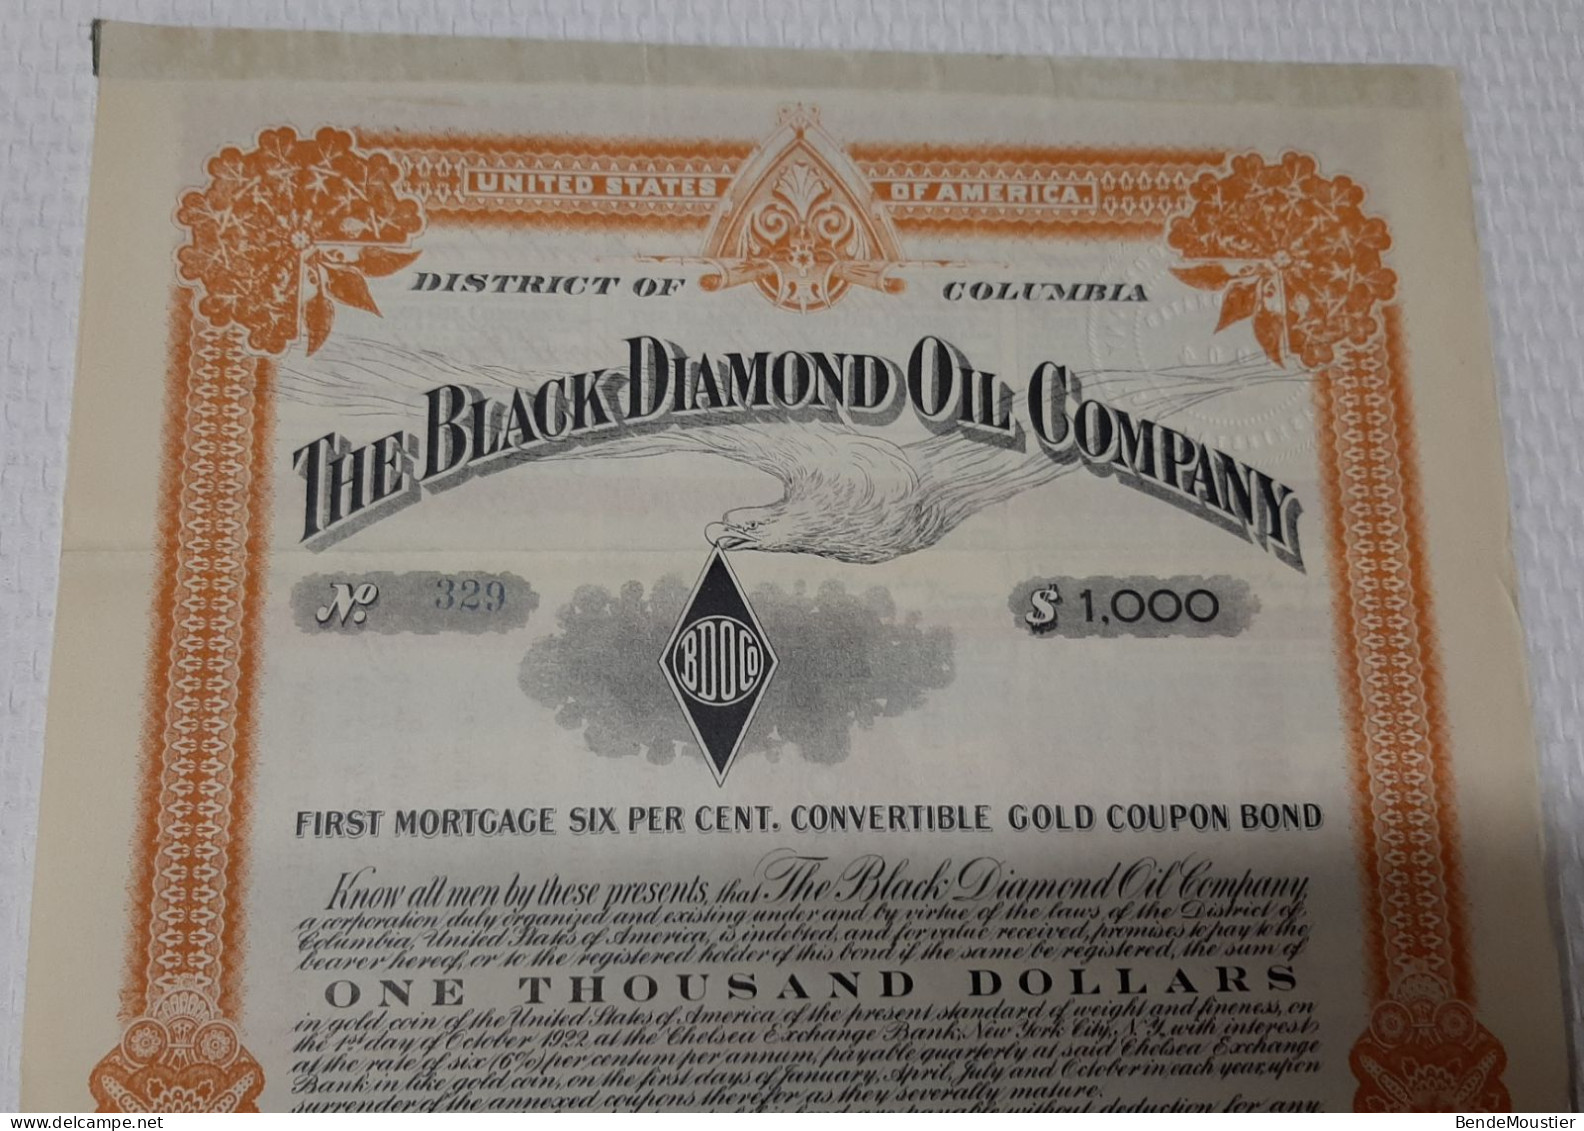 District Of Columbia - The Black Diamond Oil Company - First Mortage 6 % Convertible Gold Coupon Bond - 1917. - Oil